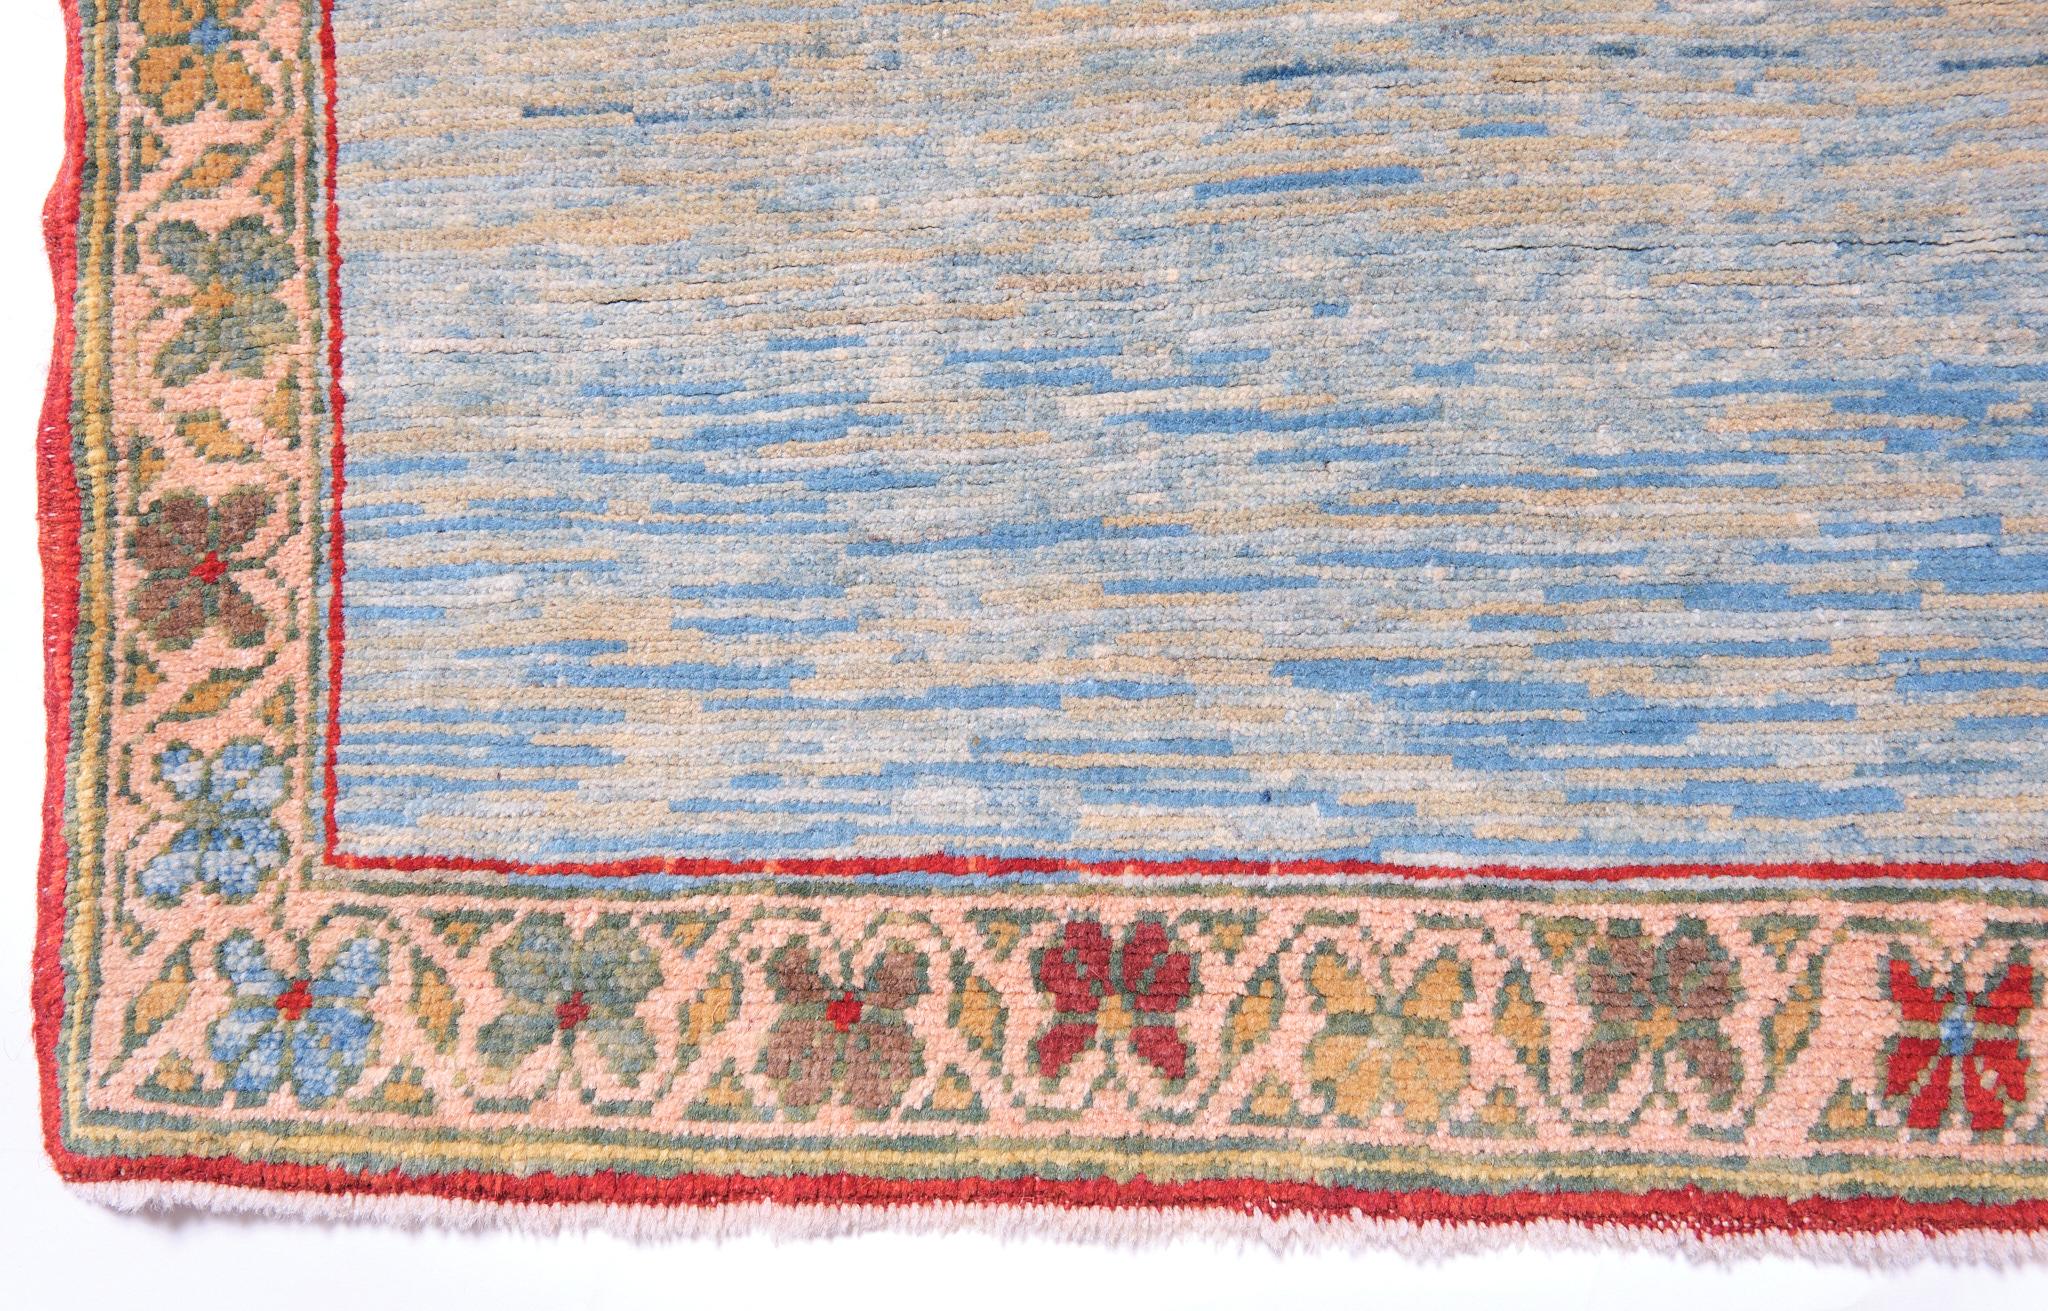 This unique design rug is interpreted by our designers with a mixture of Ararat Rugs’ soft blue tone natural dyed hand-spun yarns. This modern rug is reminiscent of a scene in impressionist river paintings, framed with colorful flowers.

Color